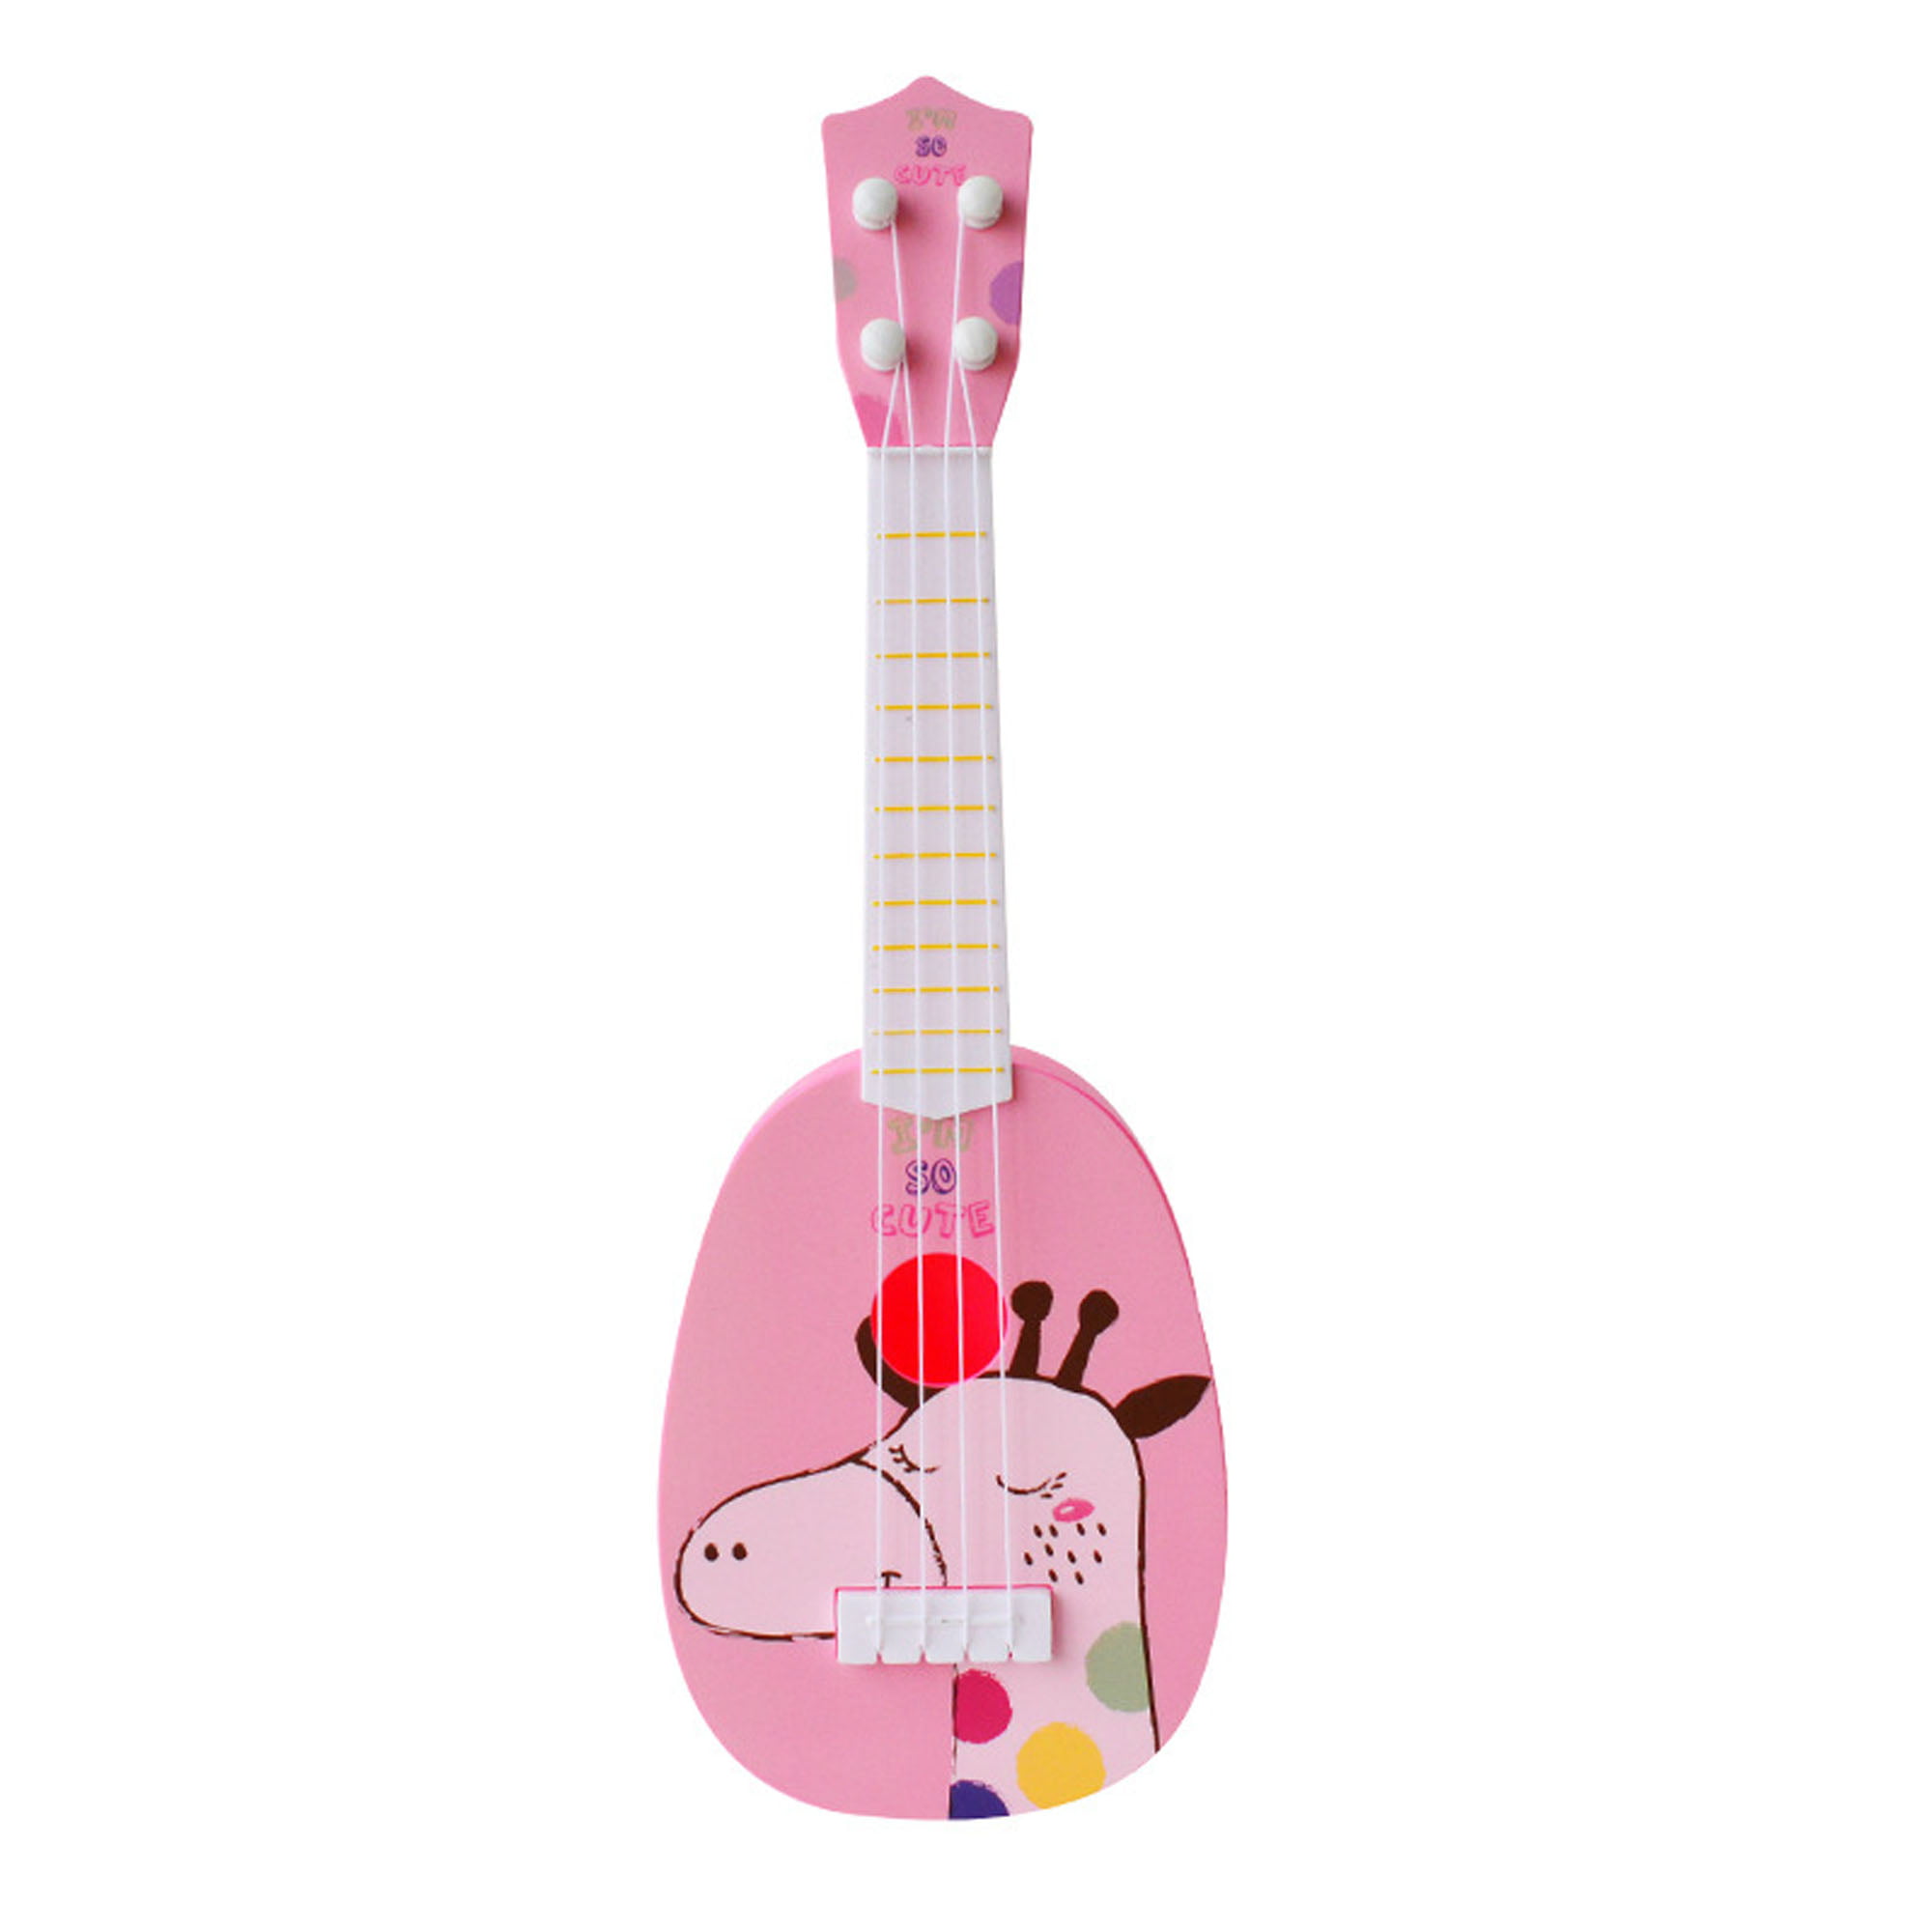 Details about   Kids Electric Guitar Toy Educational Musical Instrument w/ Light Music Xmas Gift 